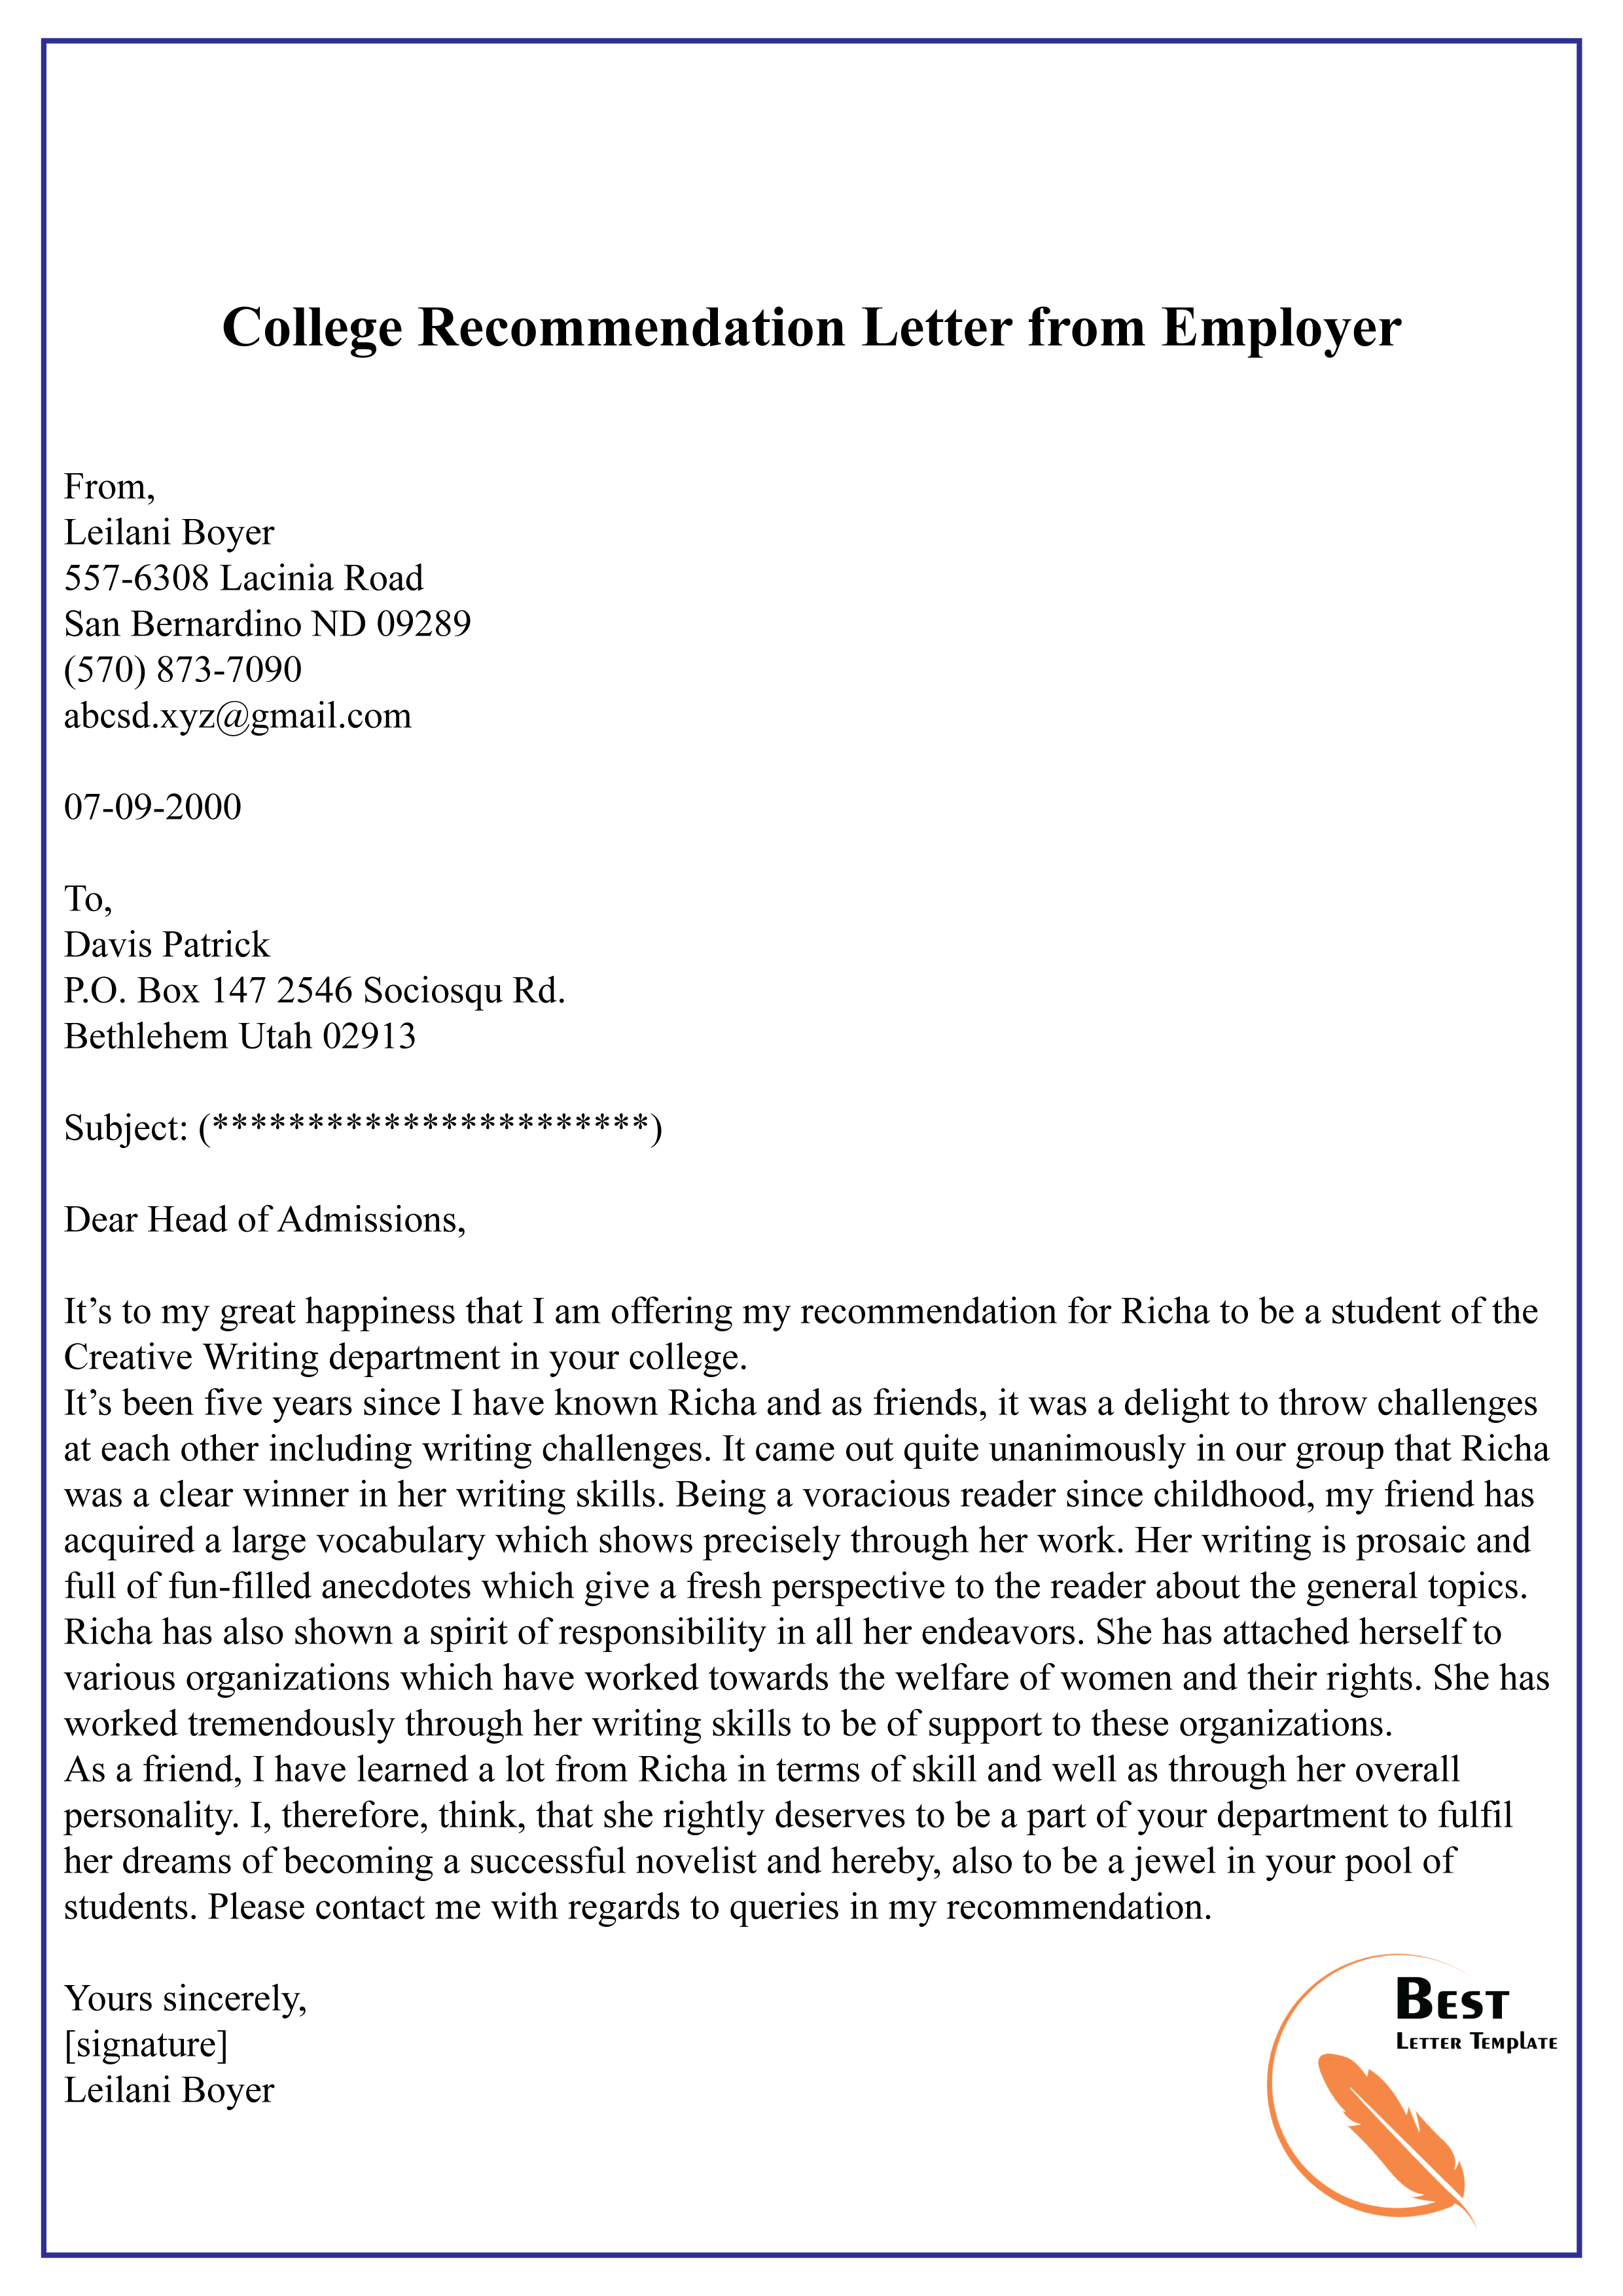 Reference Letter Template From Employer from bestlettertemplate.com